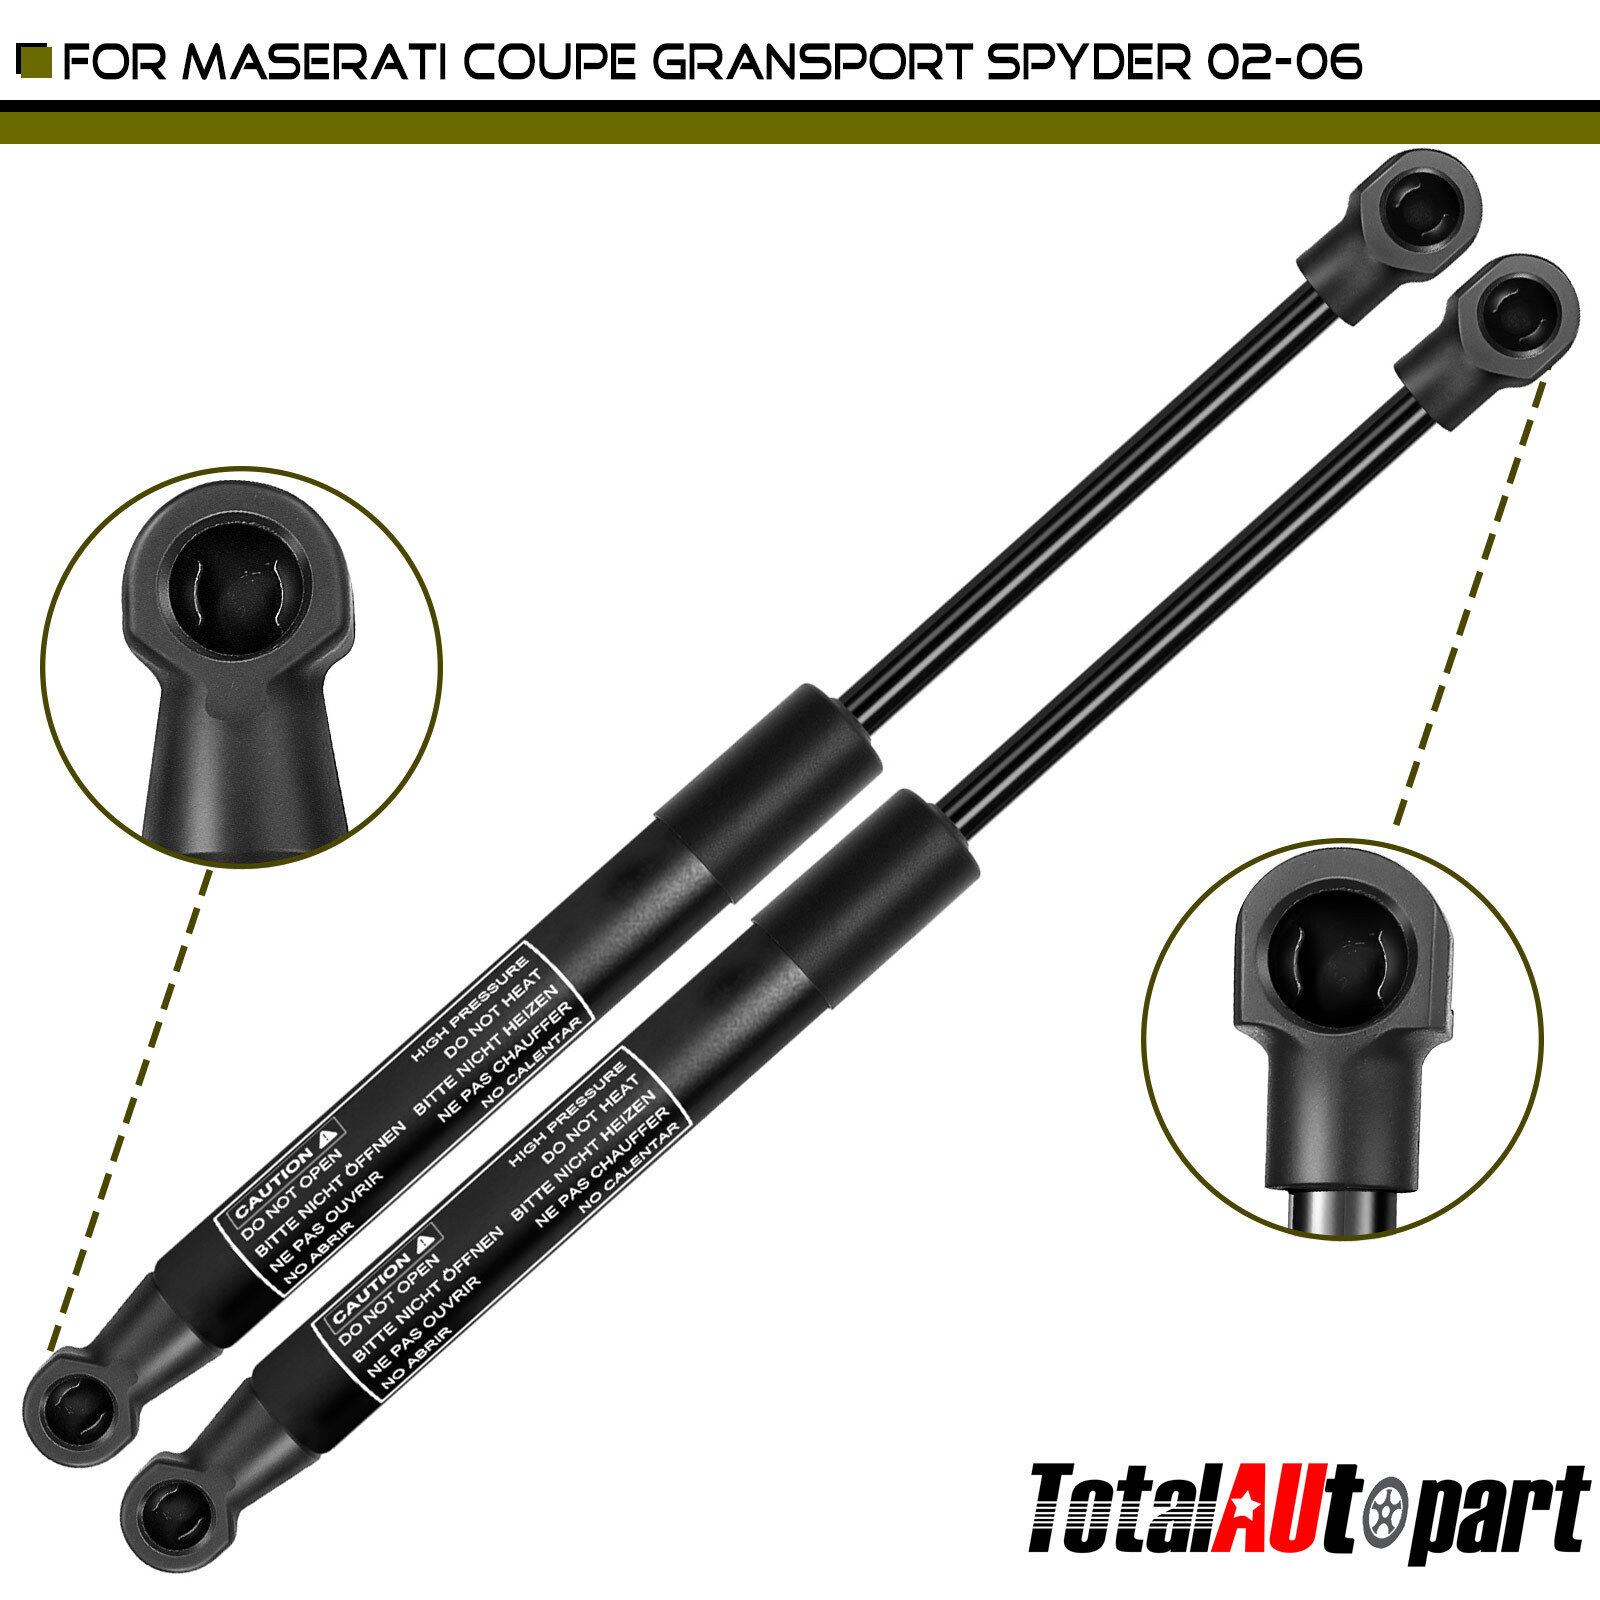 2Pcs Lift Supports Shocks for Maserati Coupe GranSport Spyder 02-06 Rear Trunk